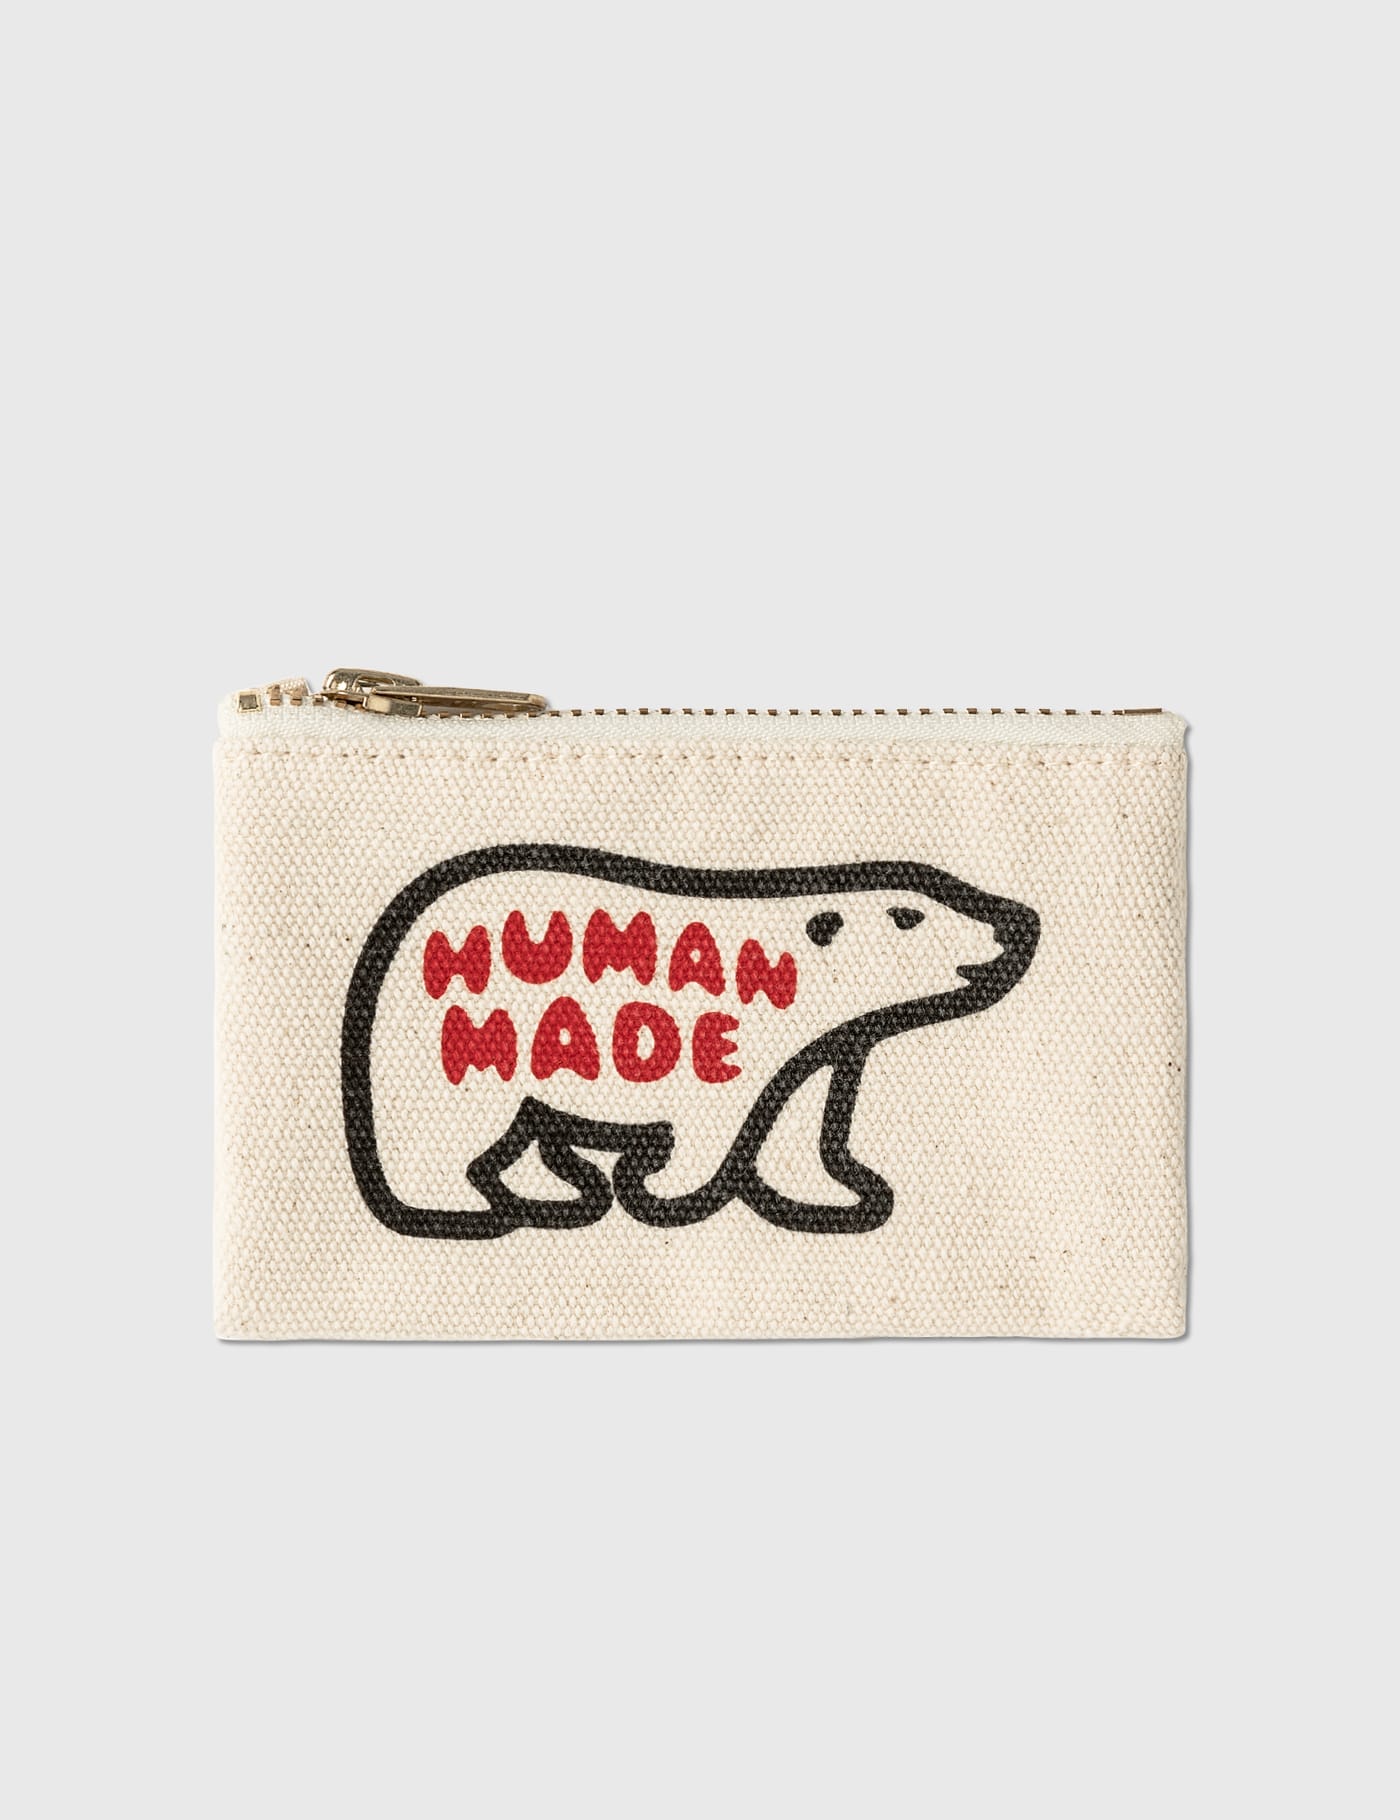 Human Made - Card Case | HBX - Globally Curated Fashion and 